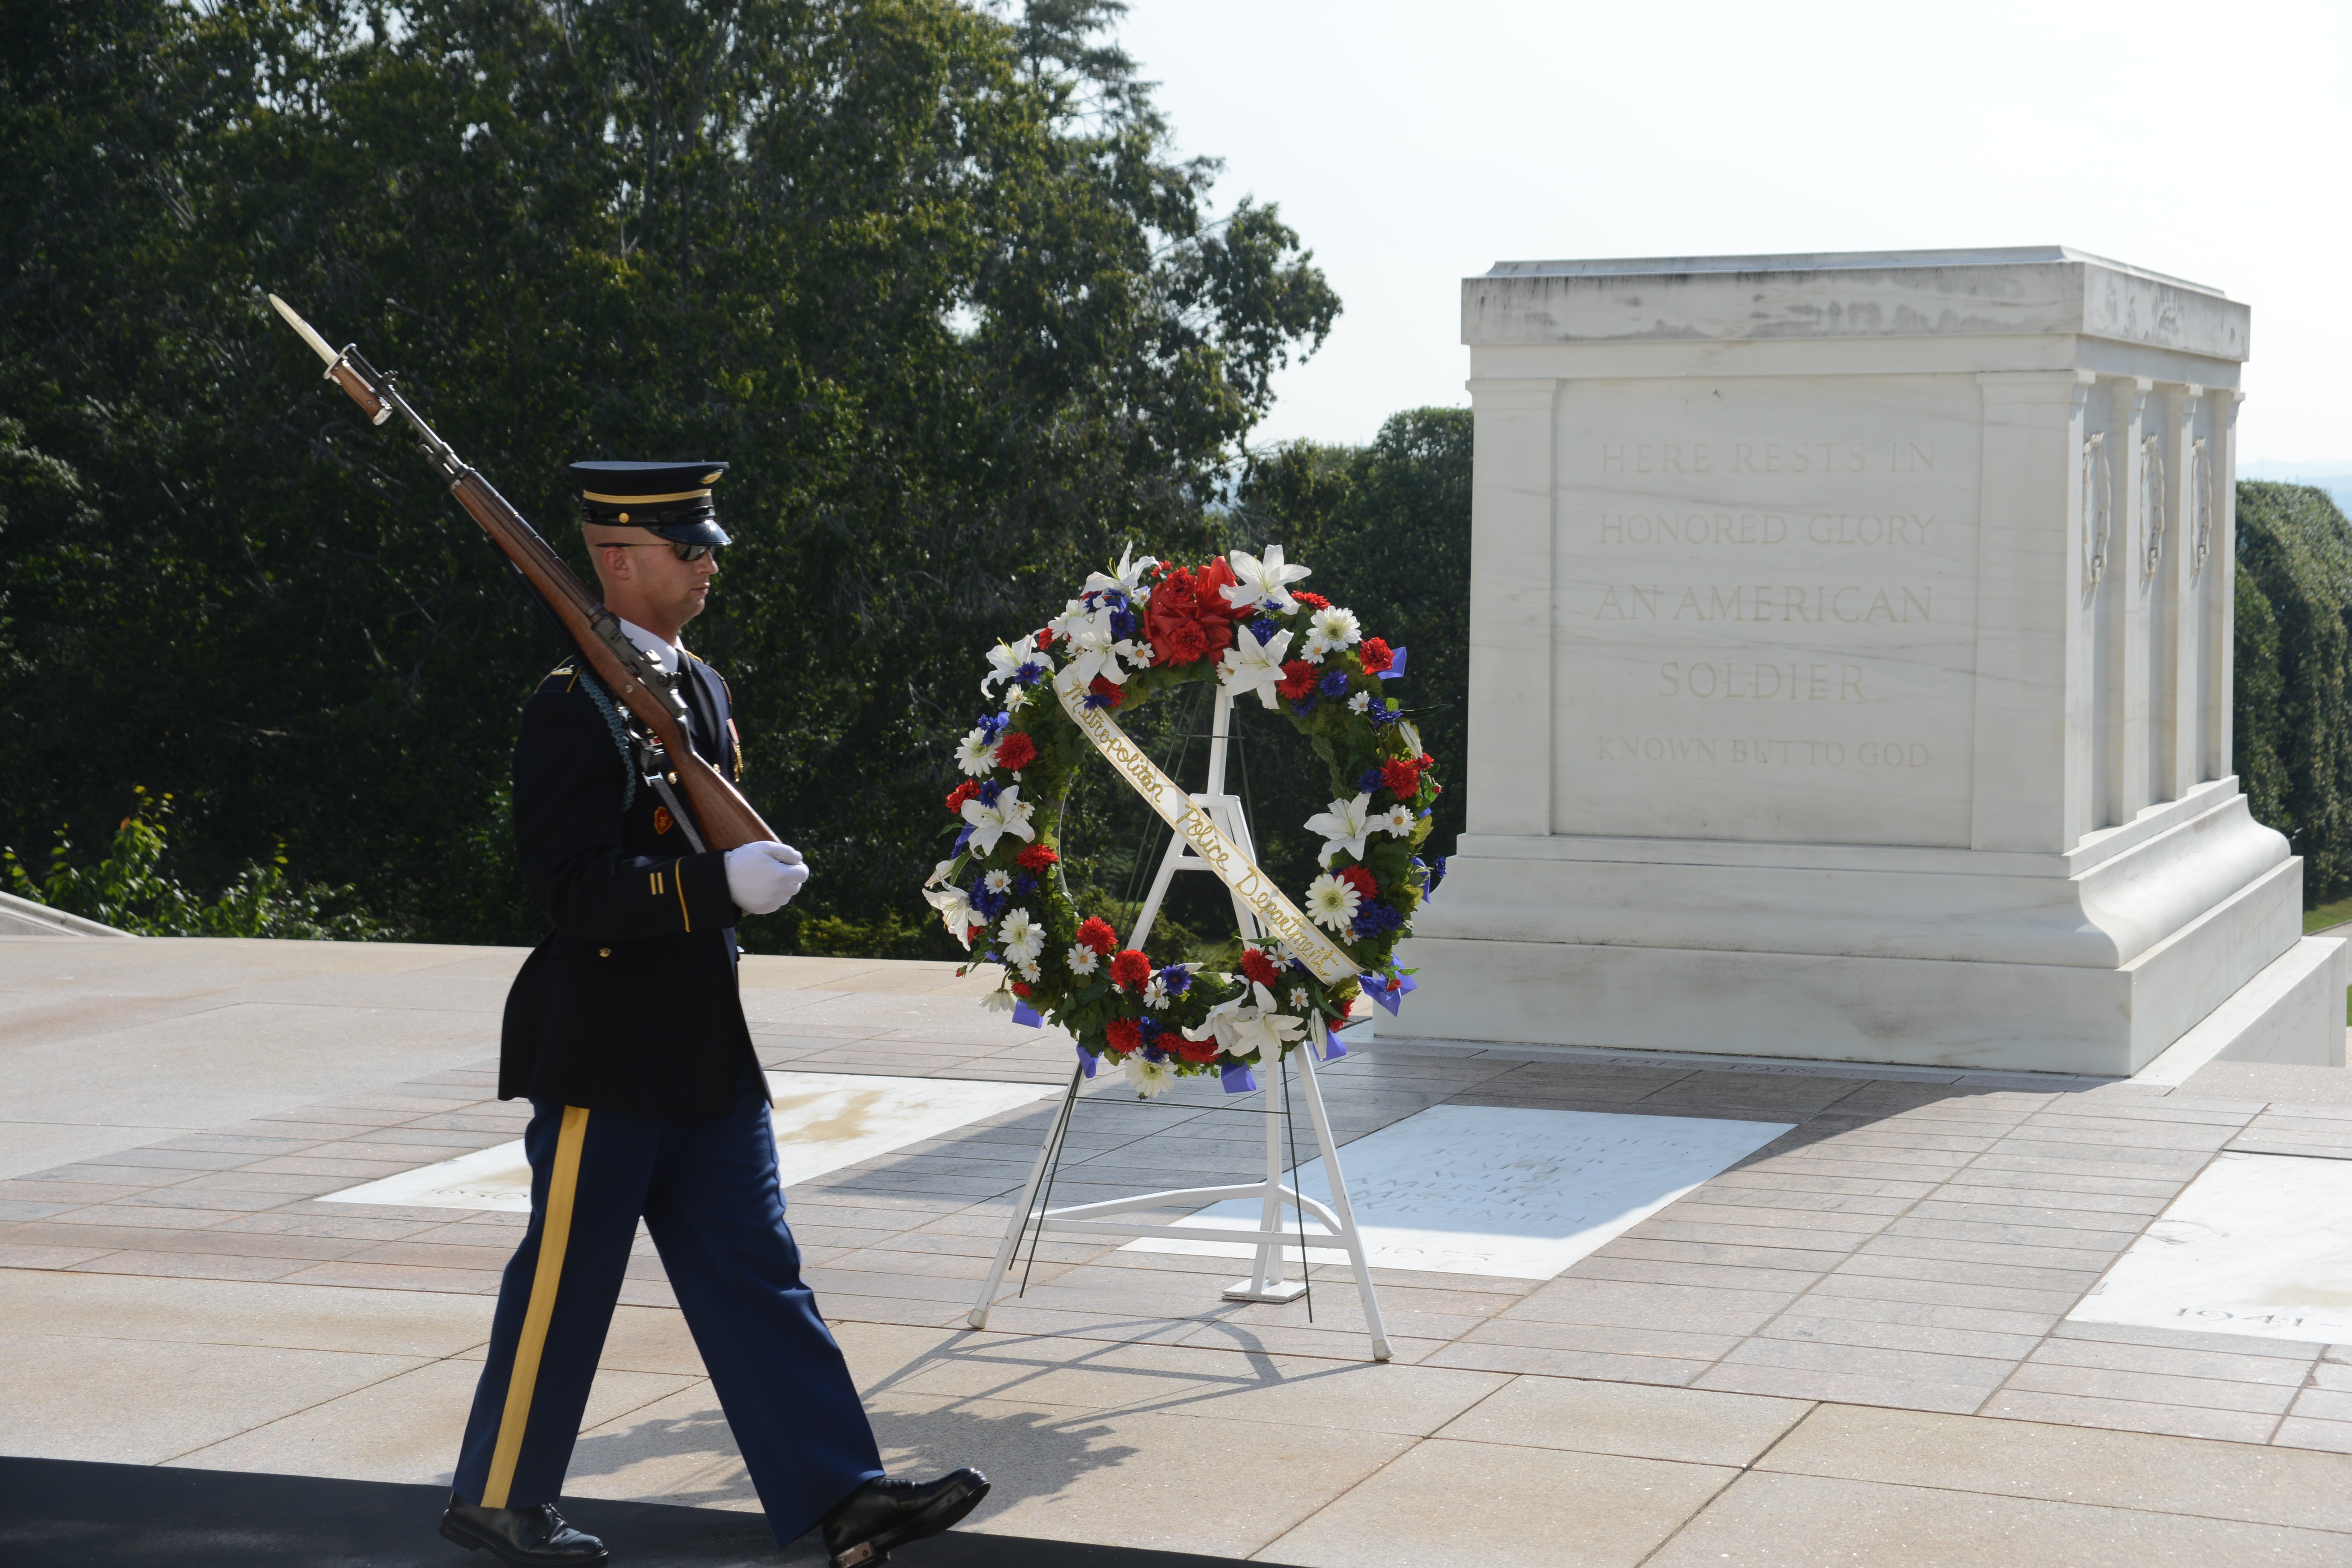 dar essay contest tomb of the unknown soldier winners